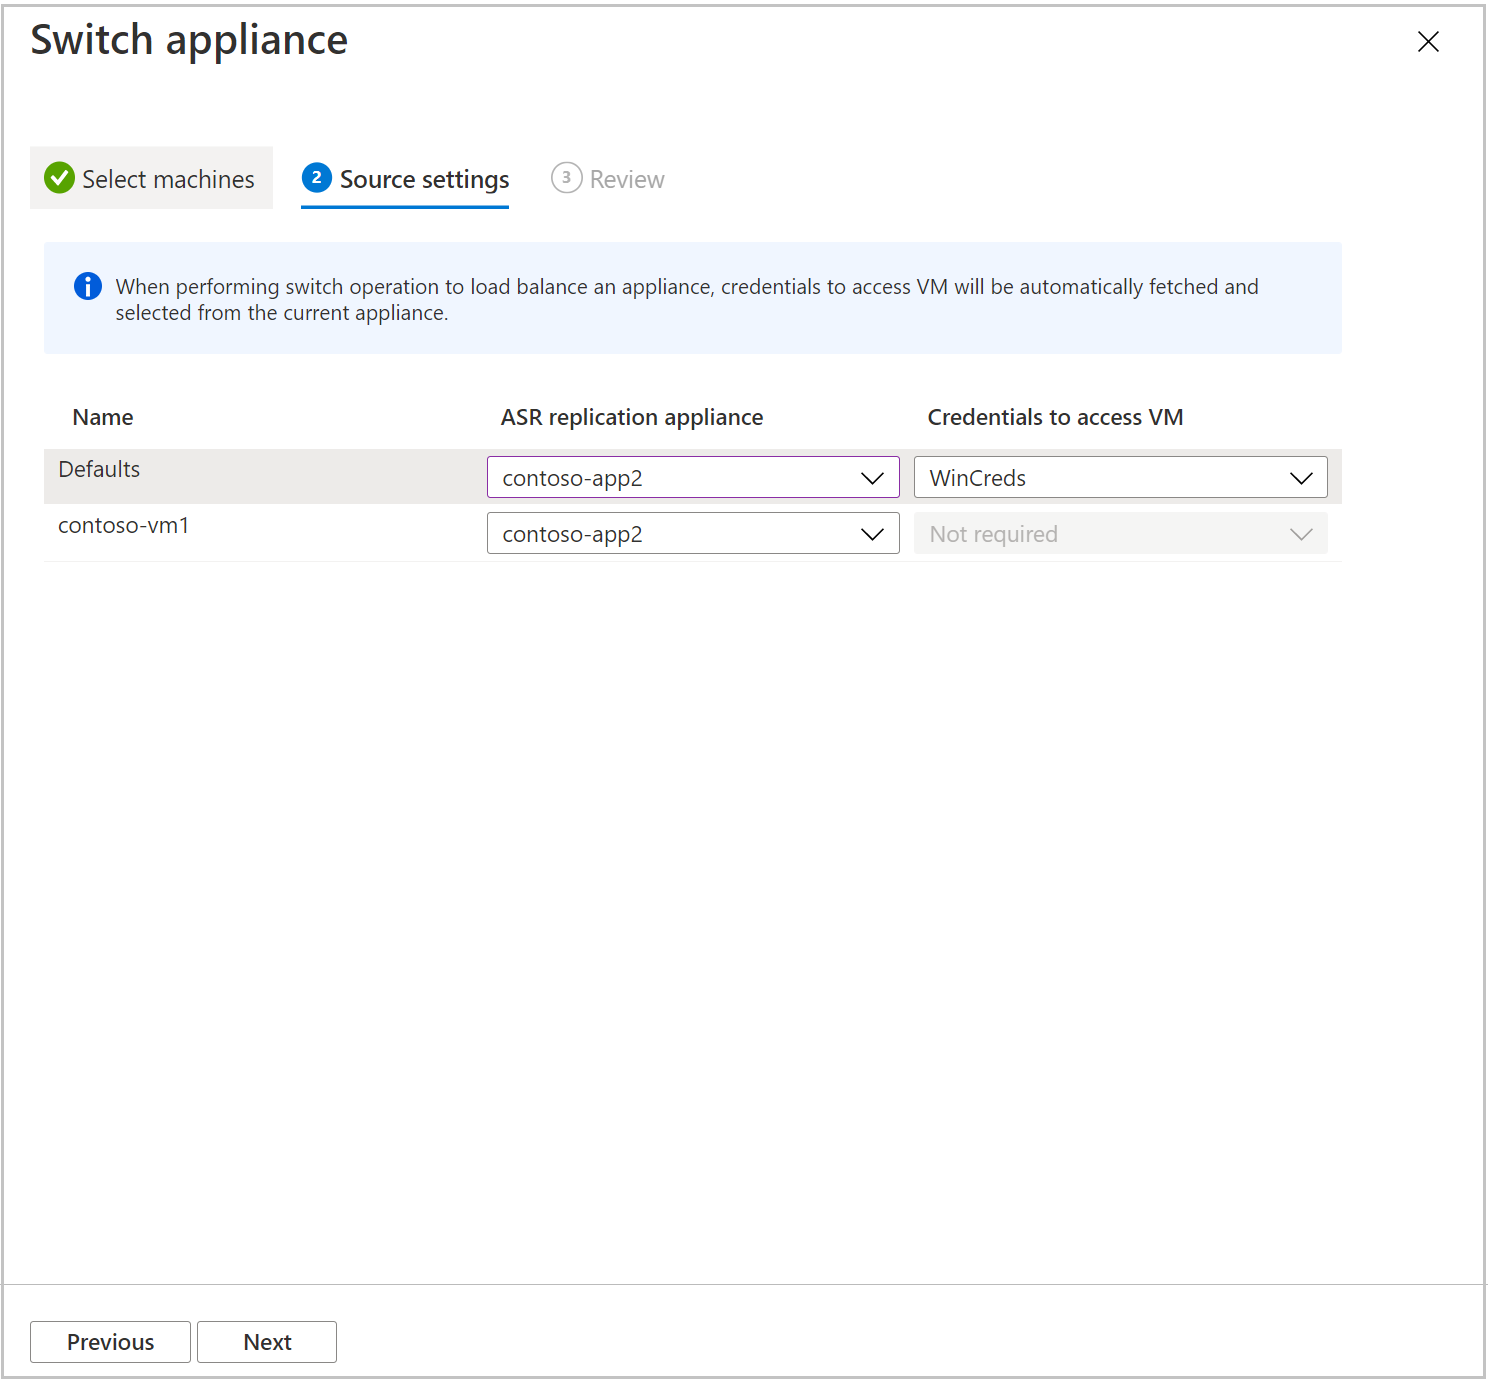 Source settings for replication appliance